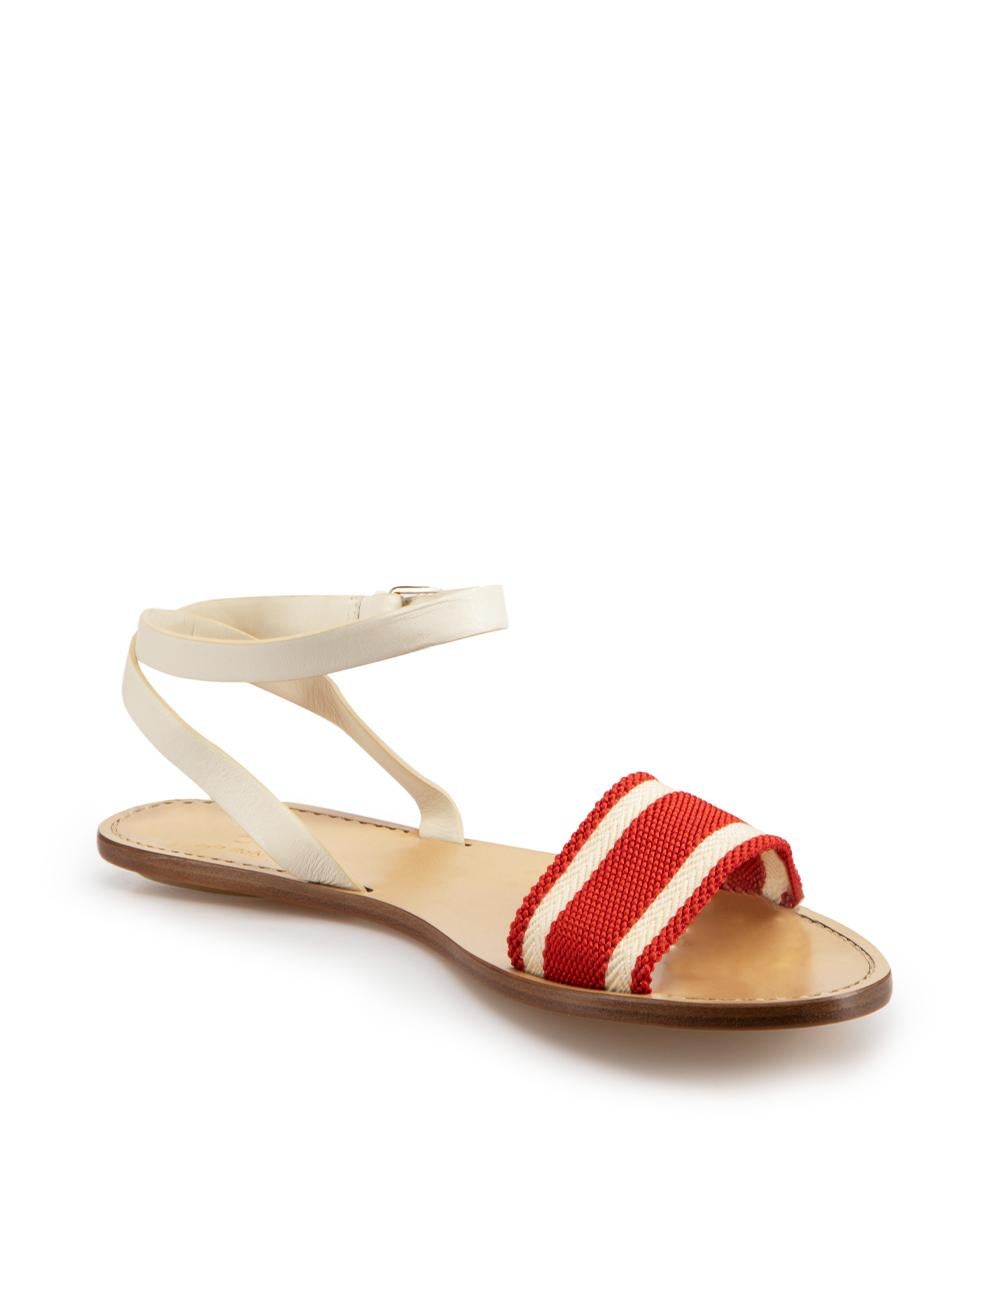 CONDITION is Very good. Minimal wear to sandals is evident. Minimal discoloured marks to inner sole and straps on this used Gucci designer resale item. Dustbag included.



Details


Red and white

Canvas

Flat strappy sandals

Striped